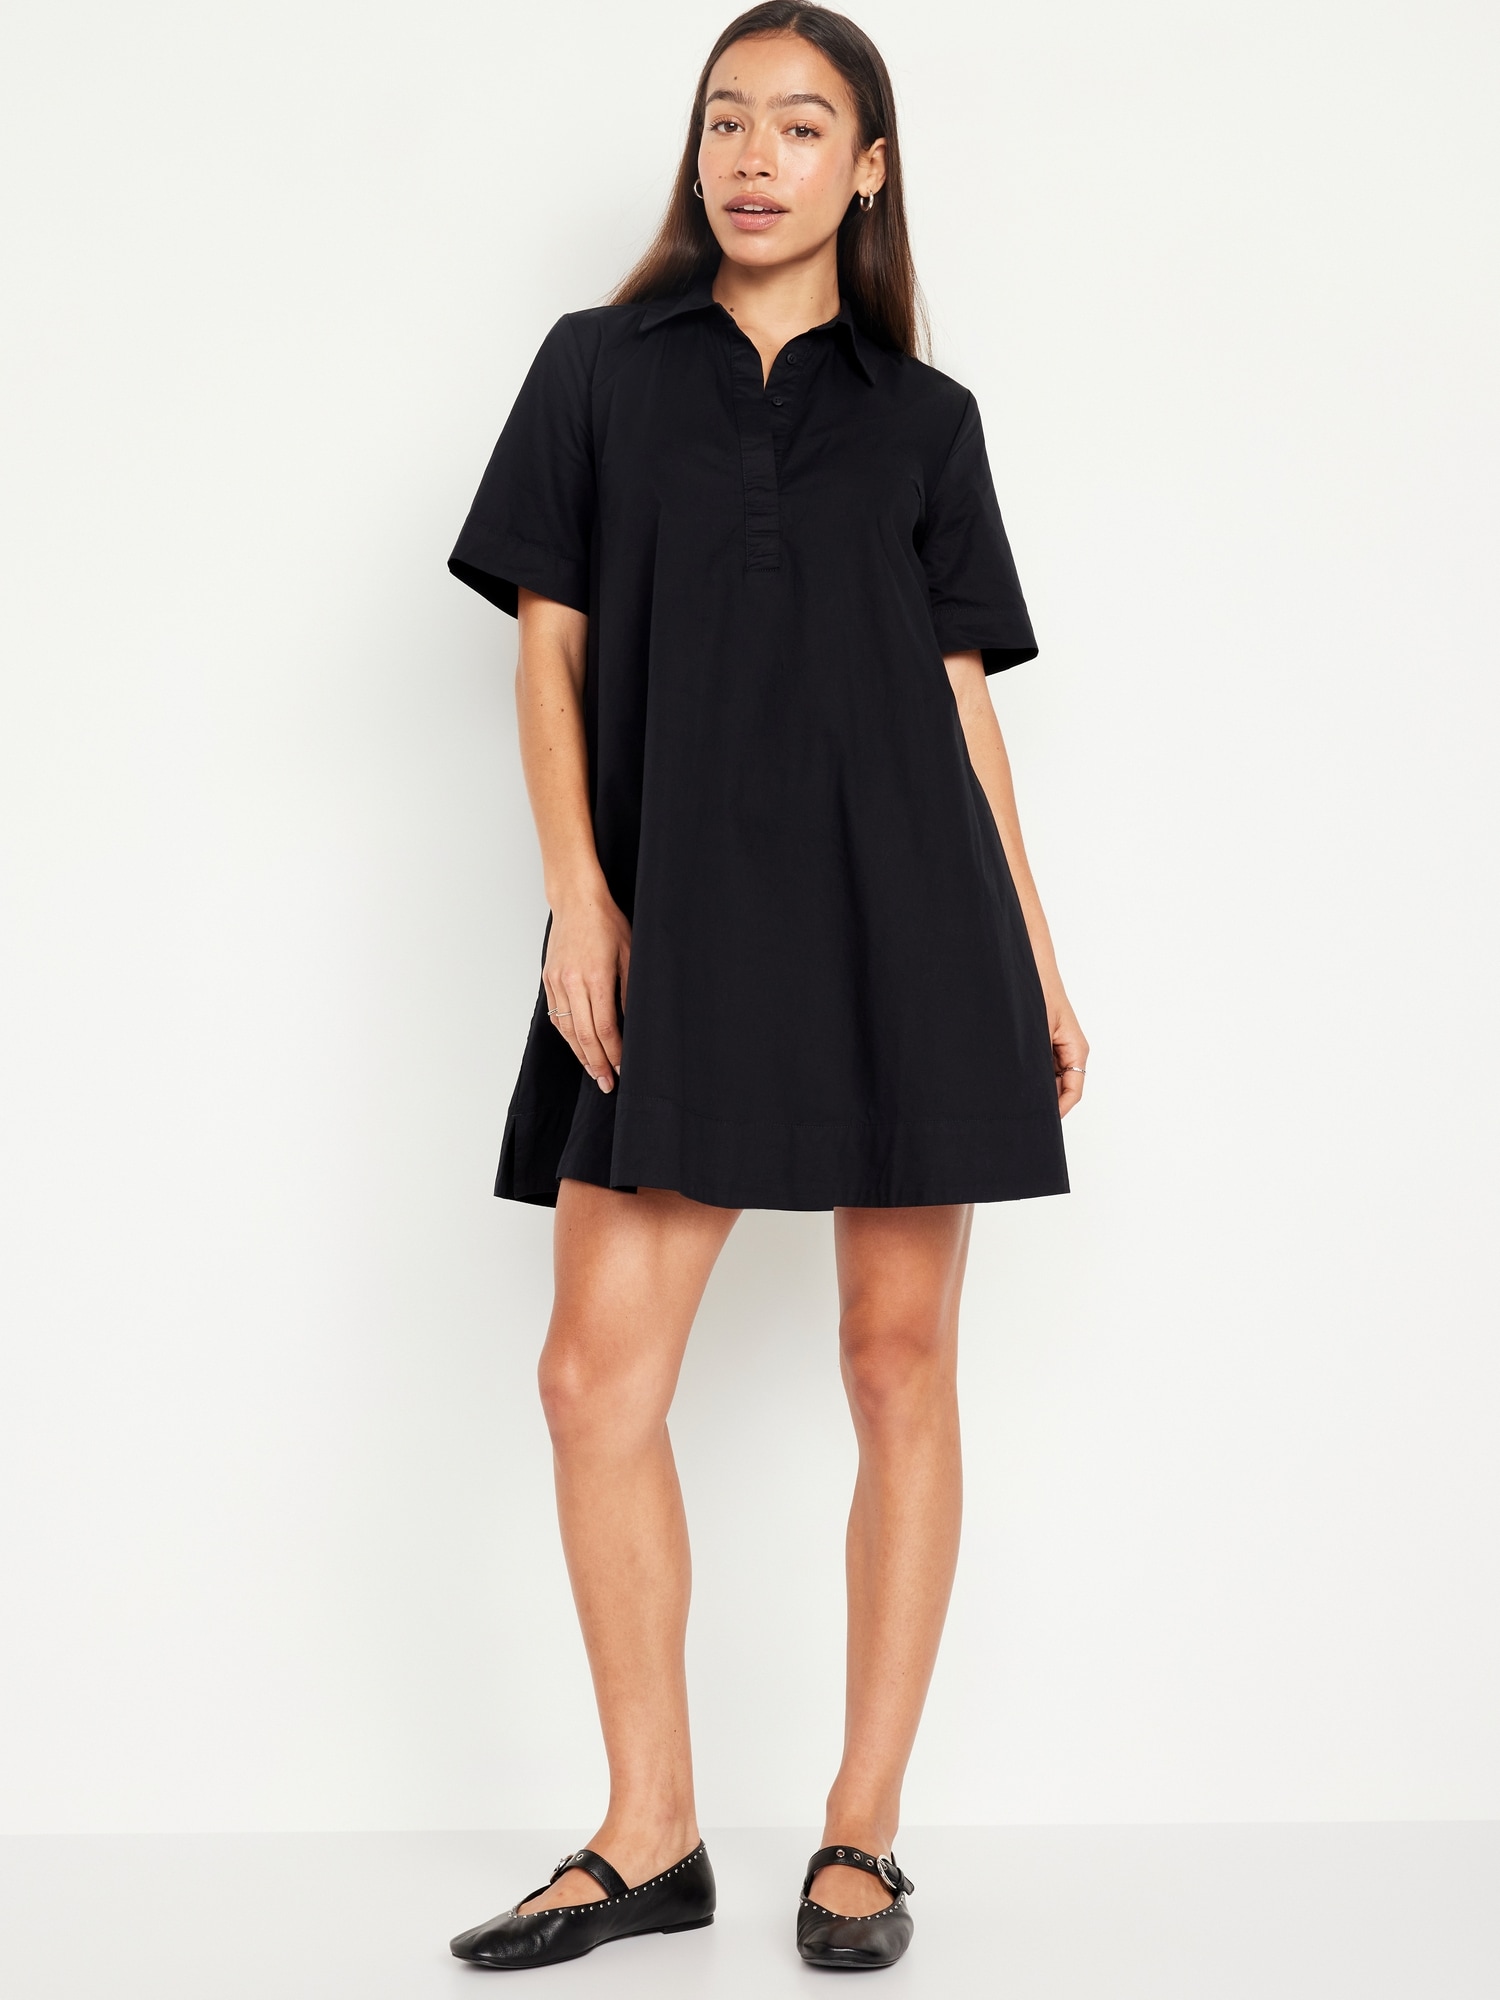 RW&CO. - Short Sleeve Fitted Dress with Crew Neckline